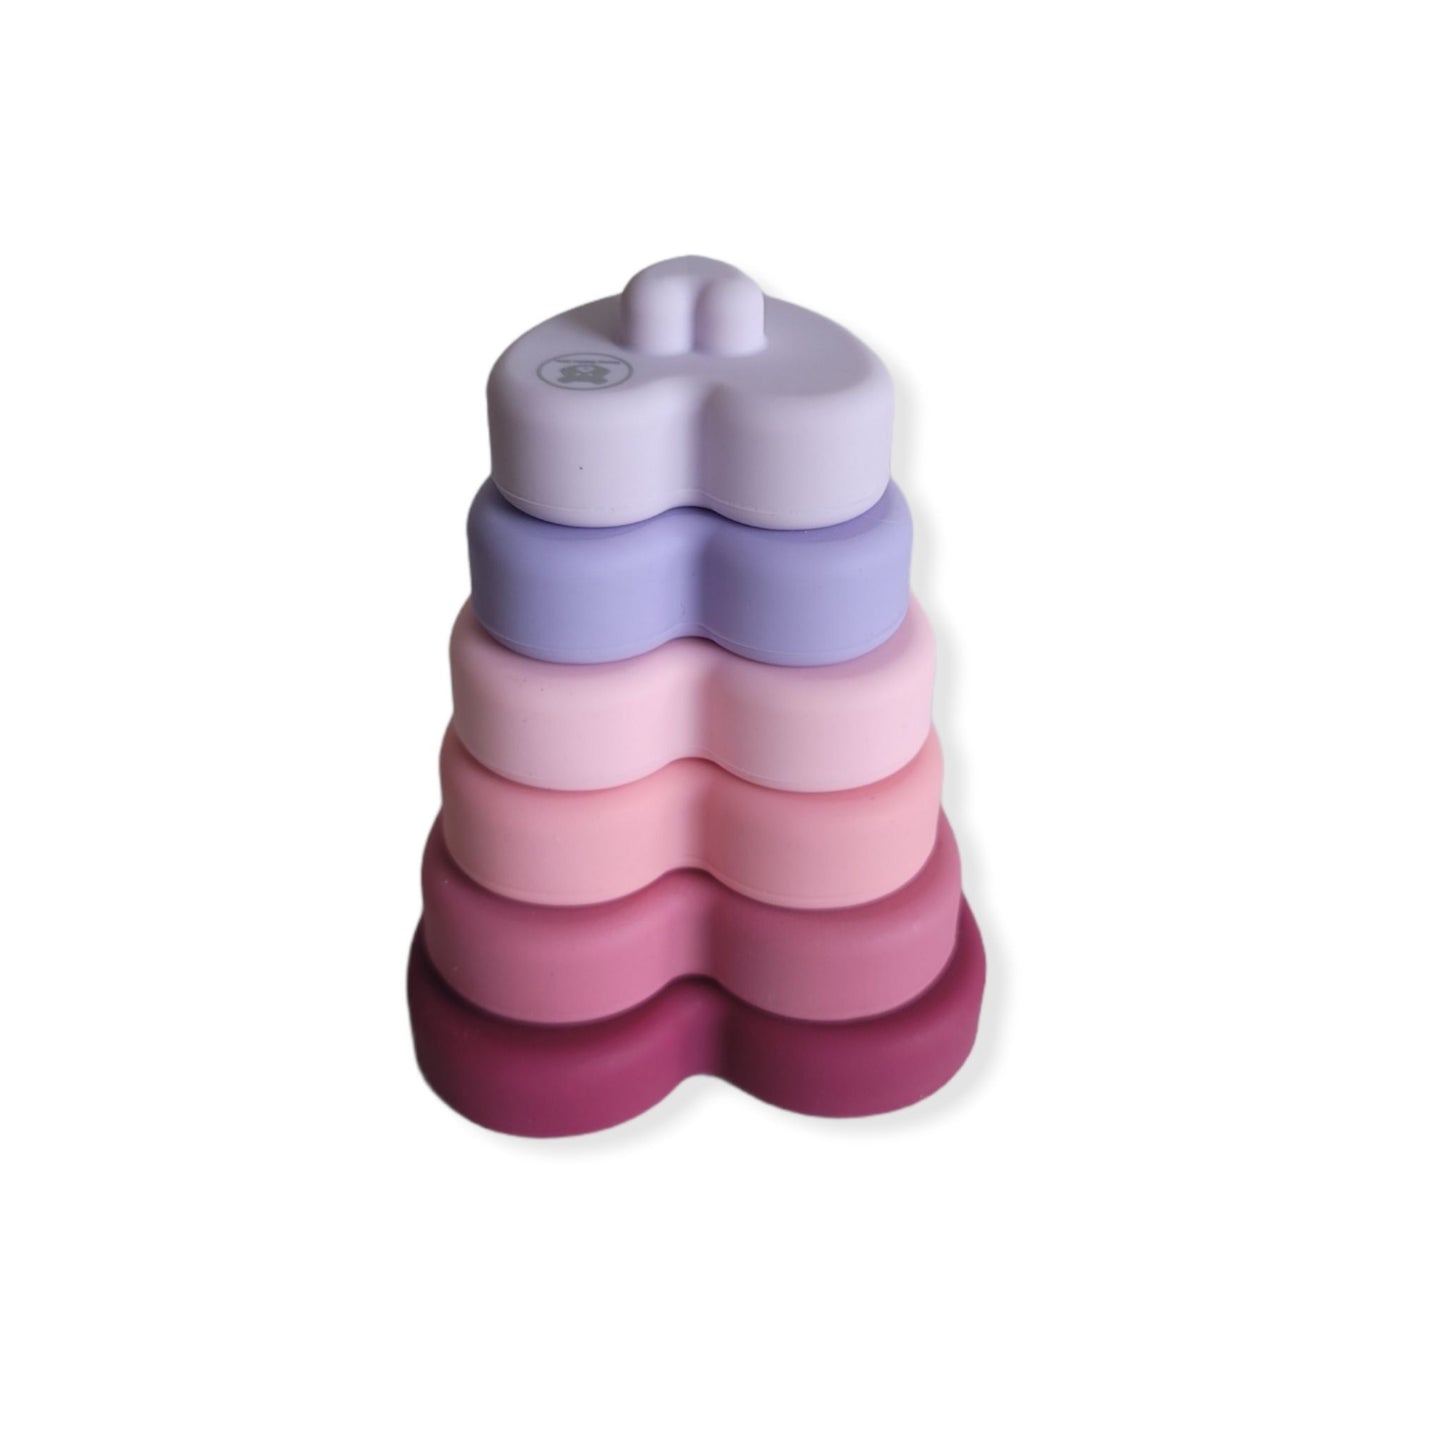 Stacking and nesting toy in shpae of a heart stacked - hunny bubba kids